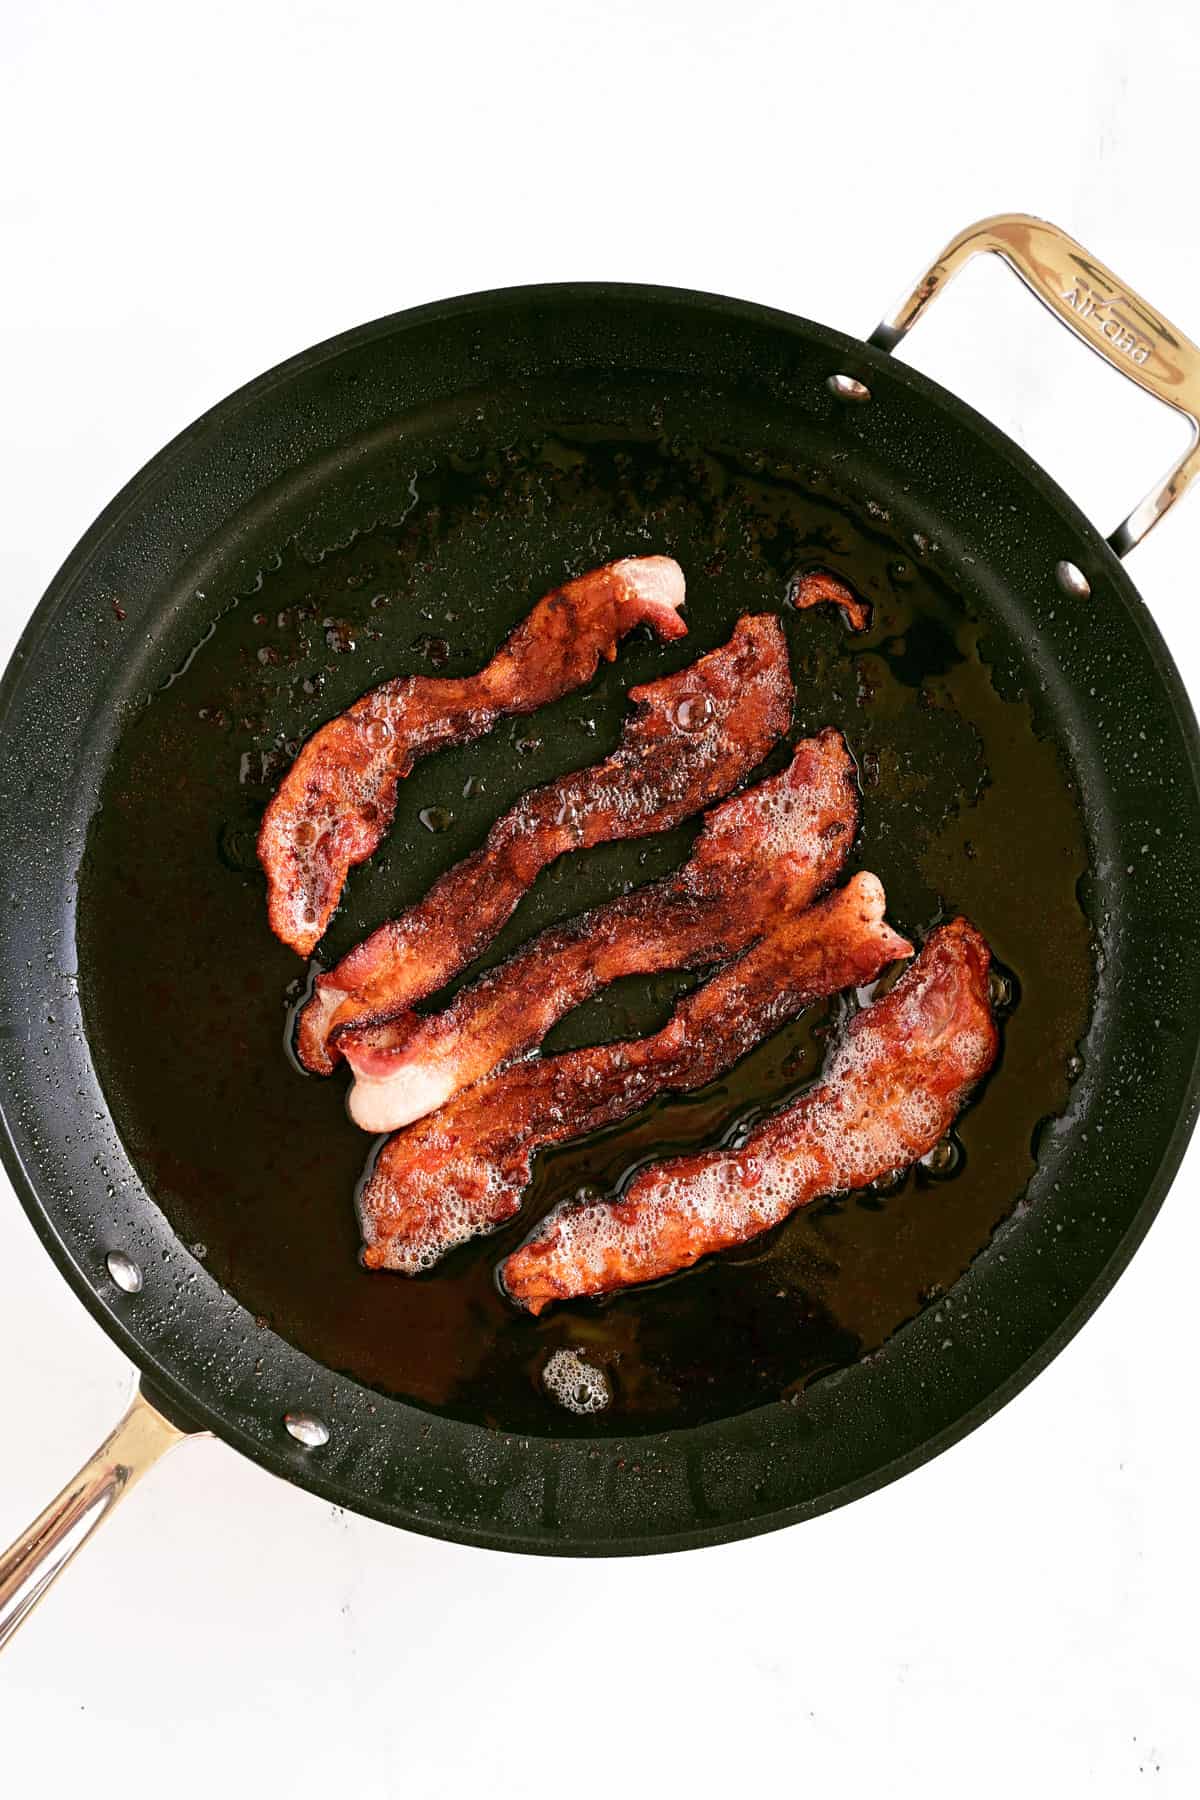 Five pieces of cooked bacon in a frying pan.